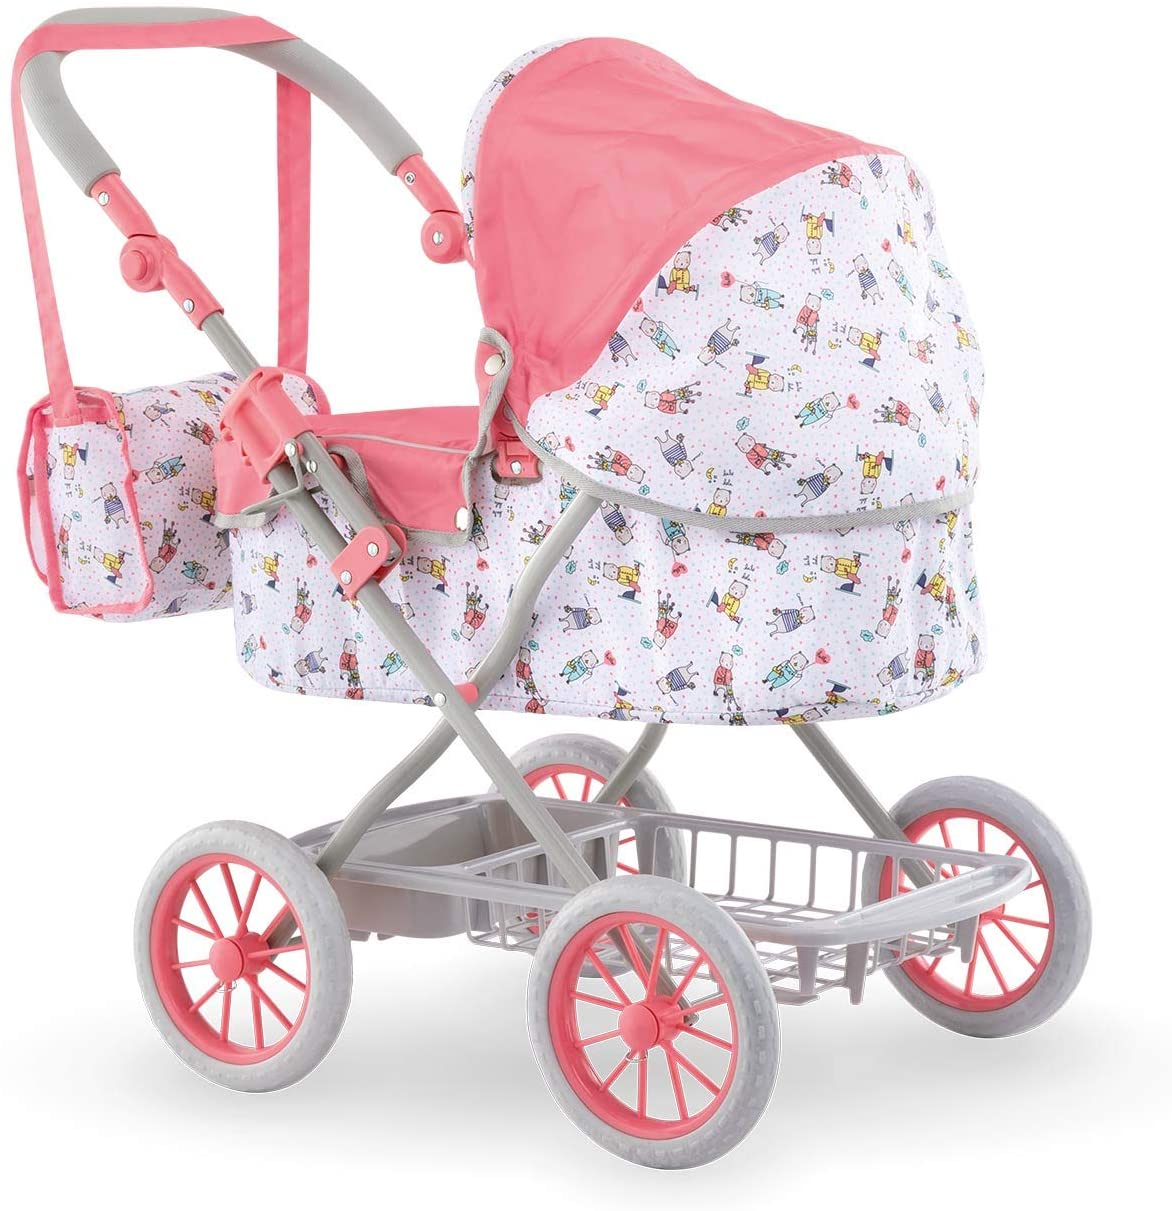 Corolle - Mon Grand Poupon Carriage Stroller - Adjustable Handle, Folding Design, for 14", 17" & 20" Baby Dolls